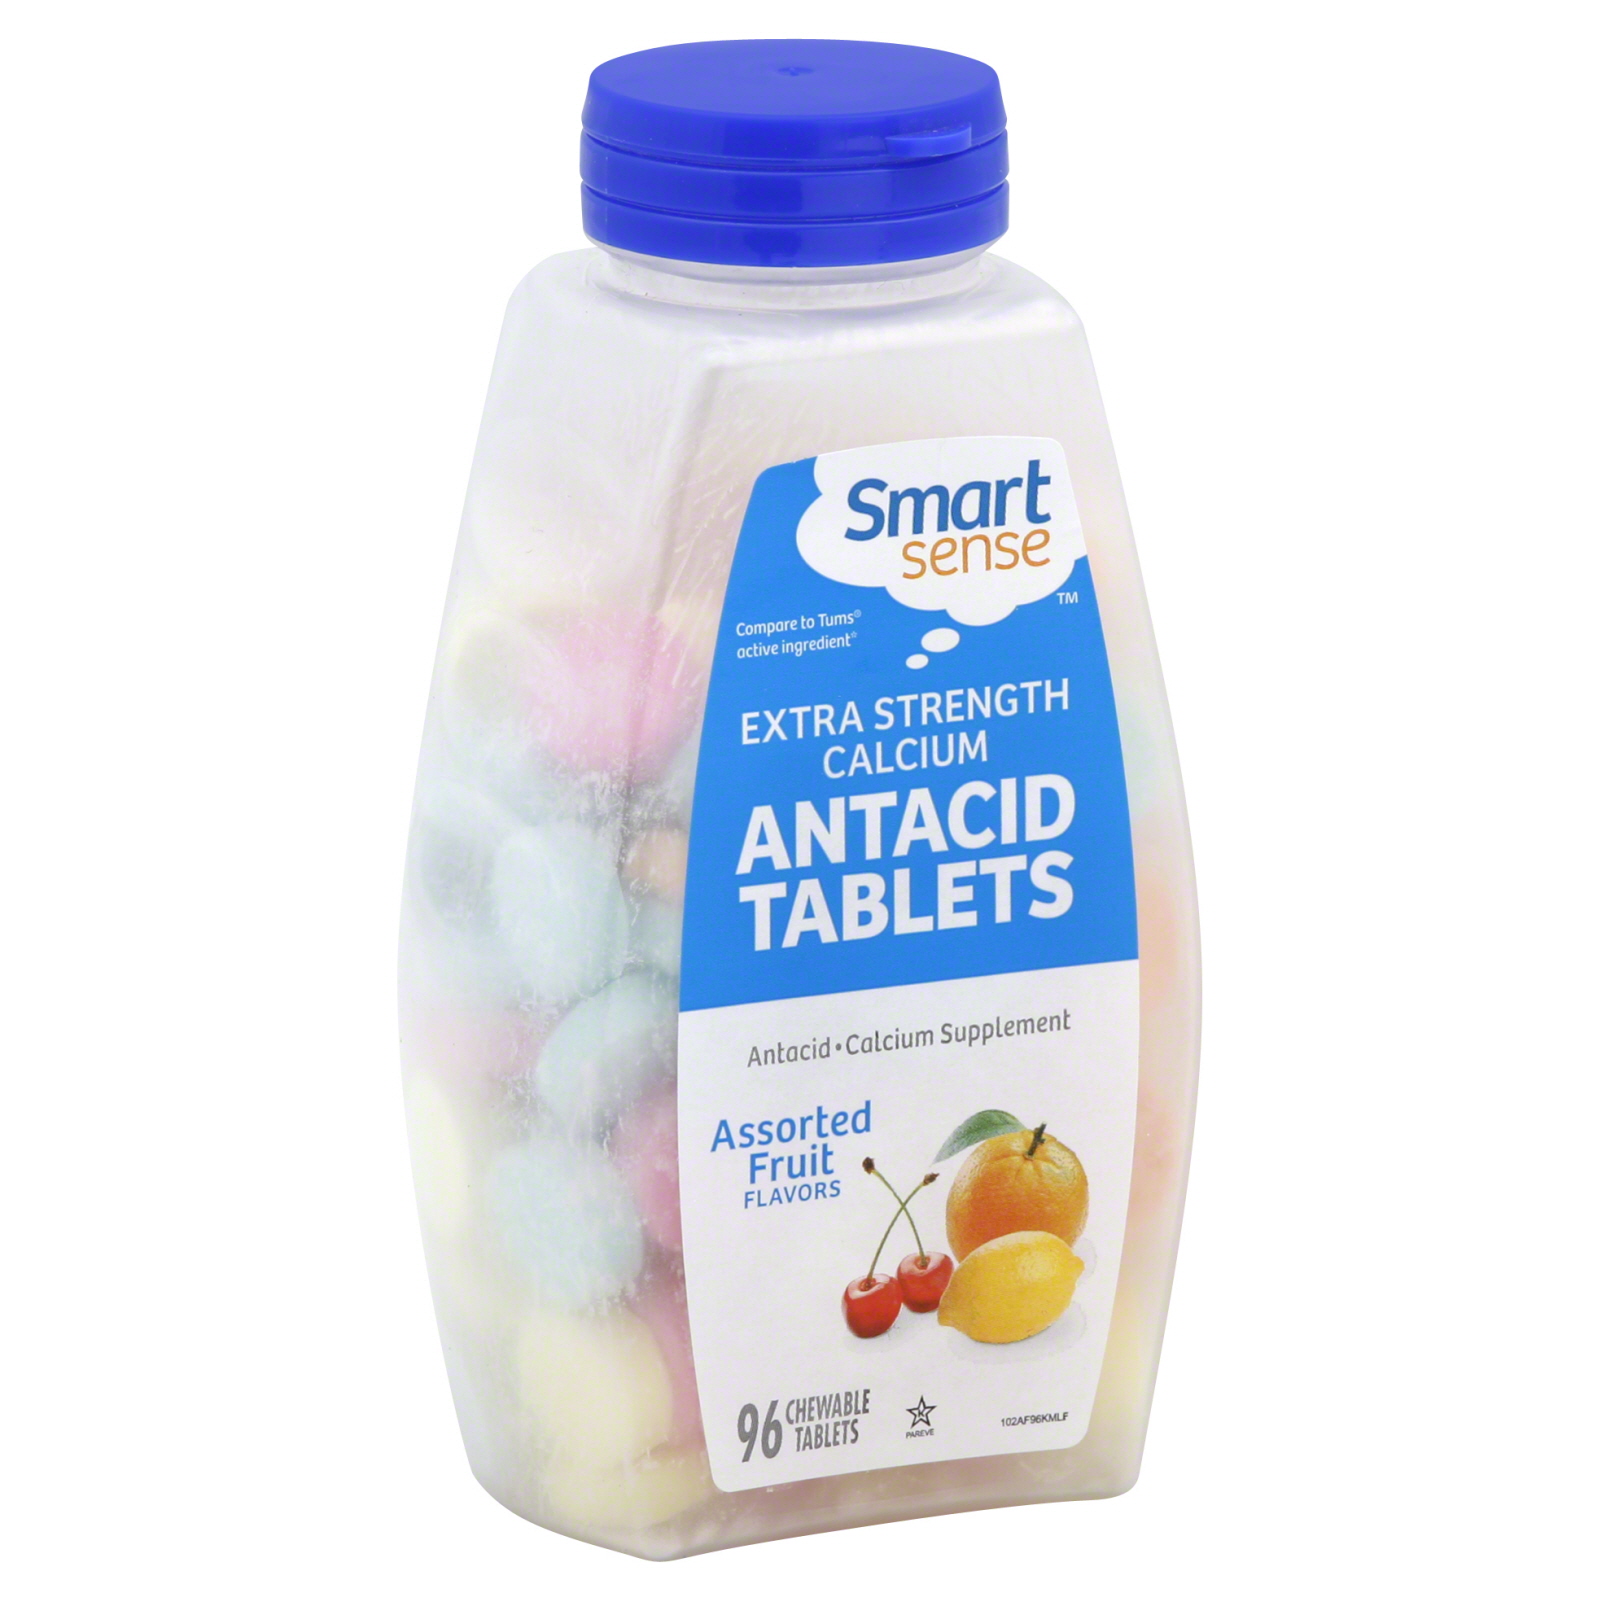 Antacid Tablets, Extra Strength Calcium, Chewable, Assorted Fruit Flavors 96 tablets